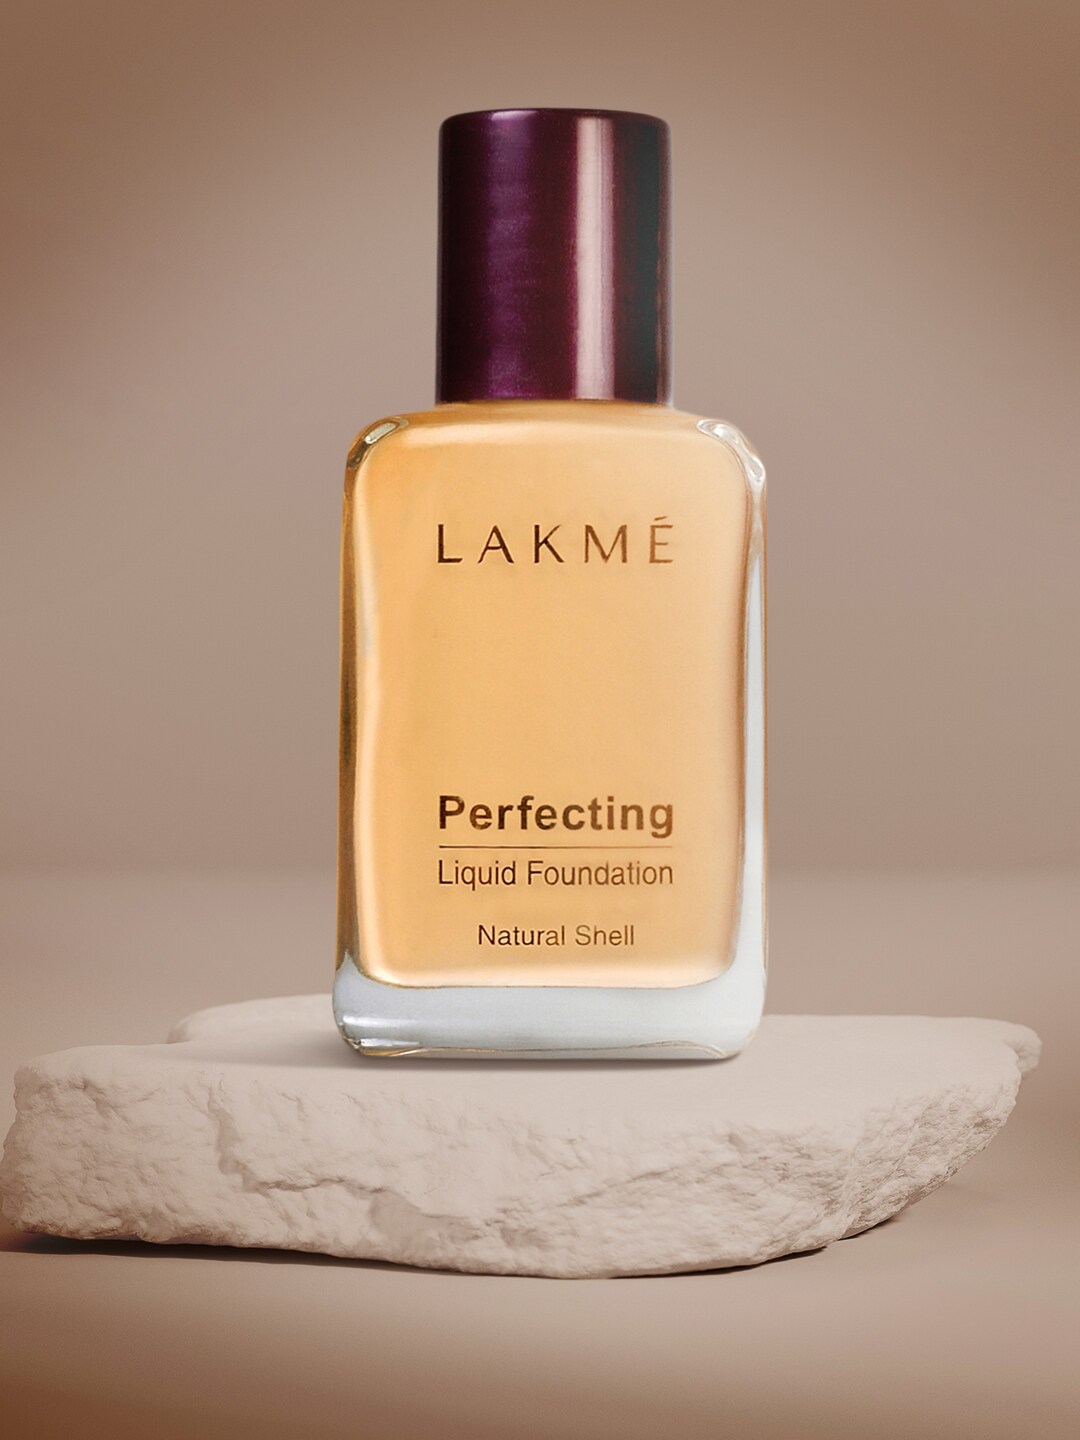 Lakme Perfecting Natural Shell Liquid Foundation Price in India